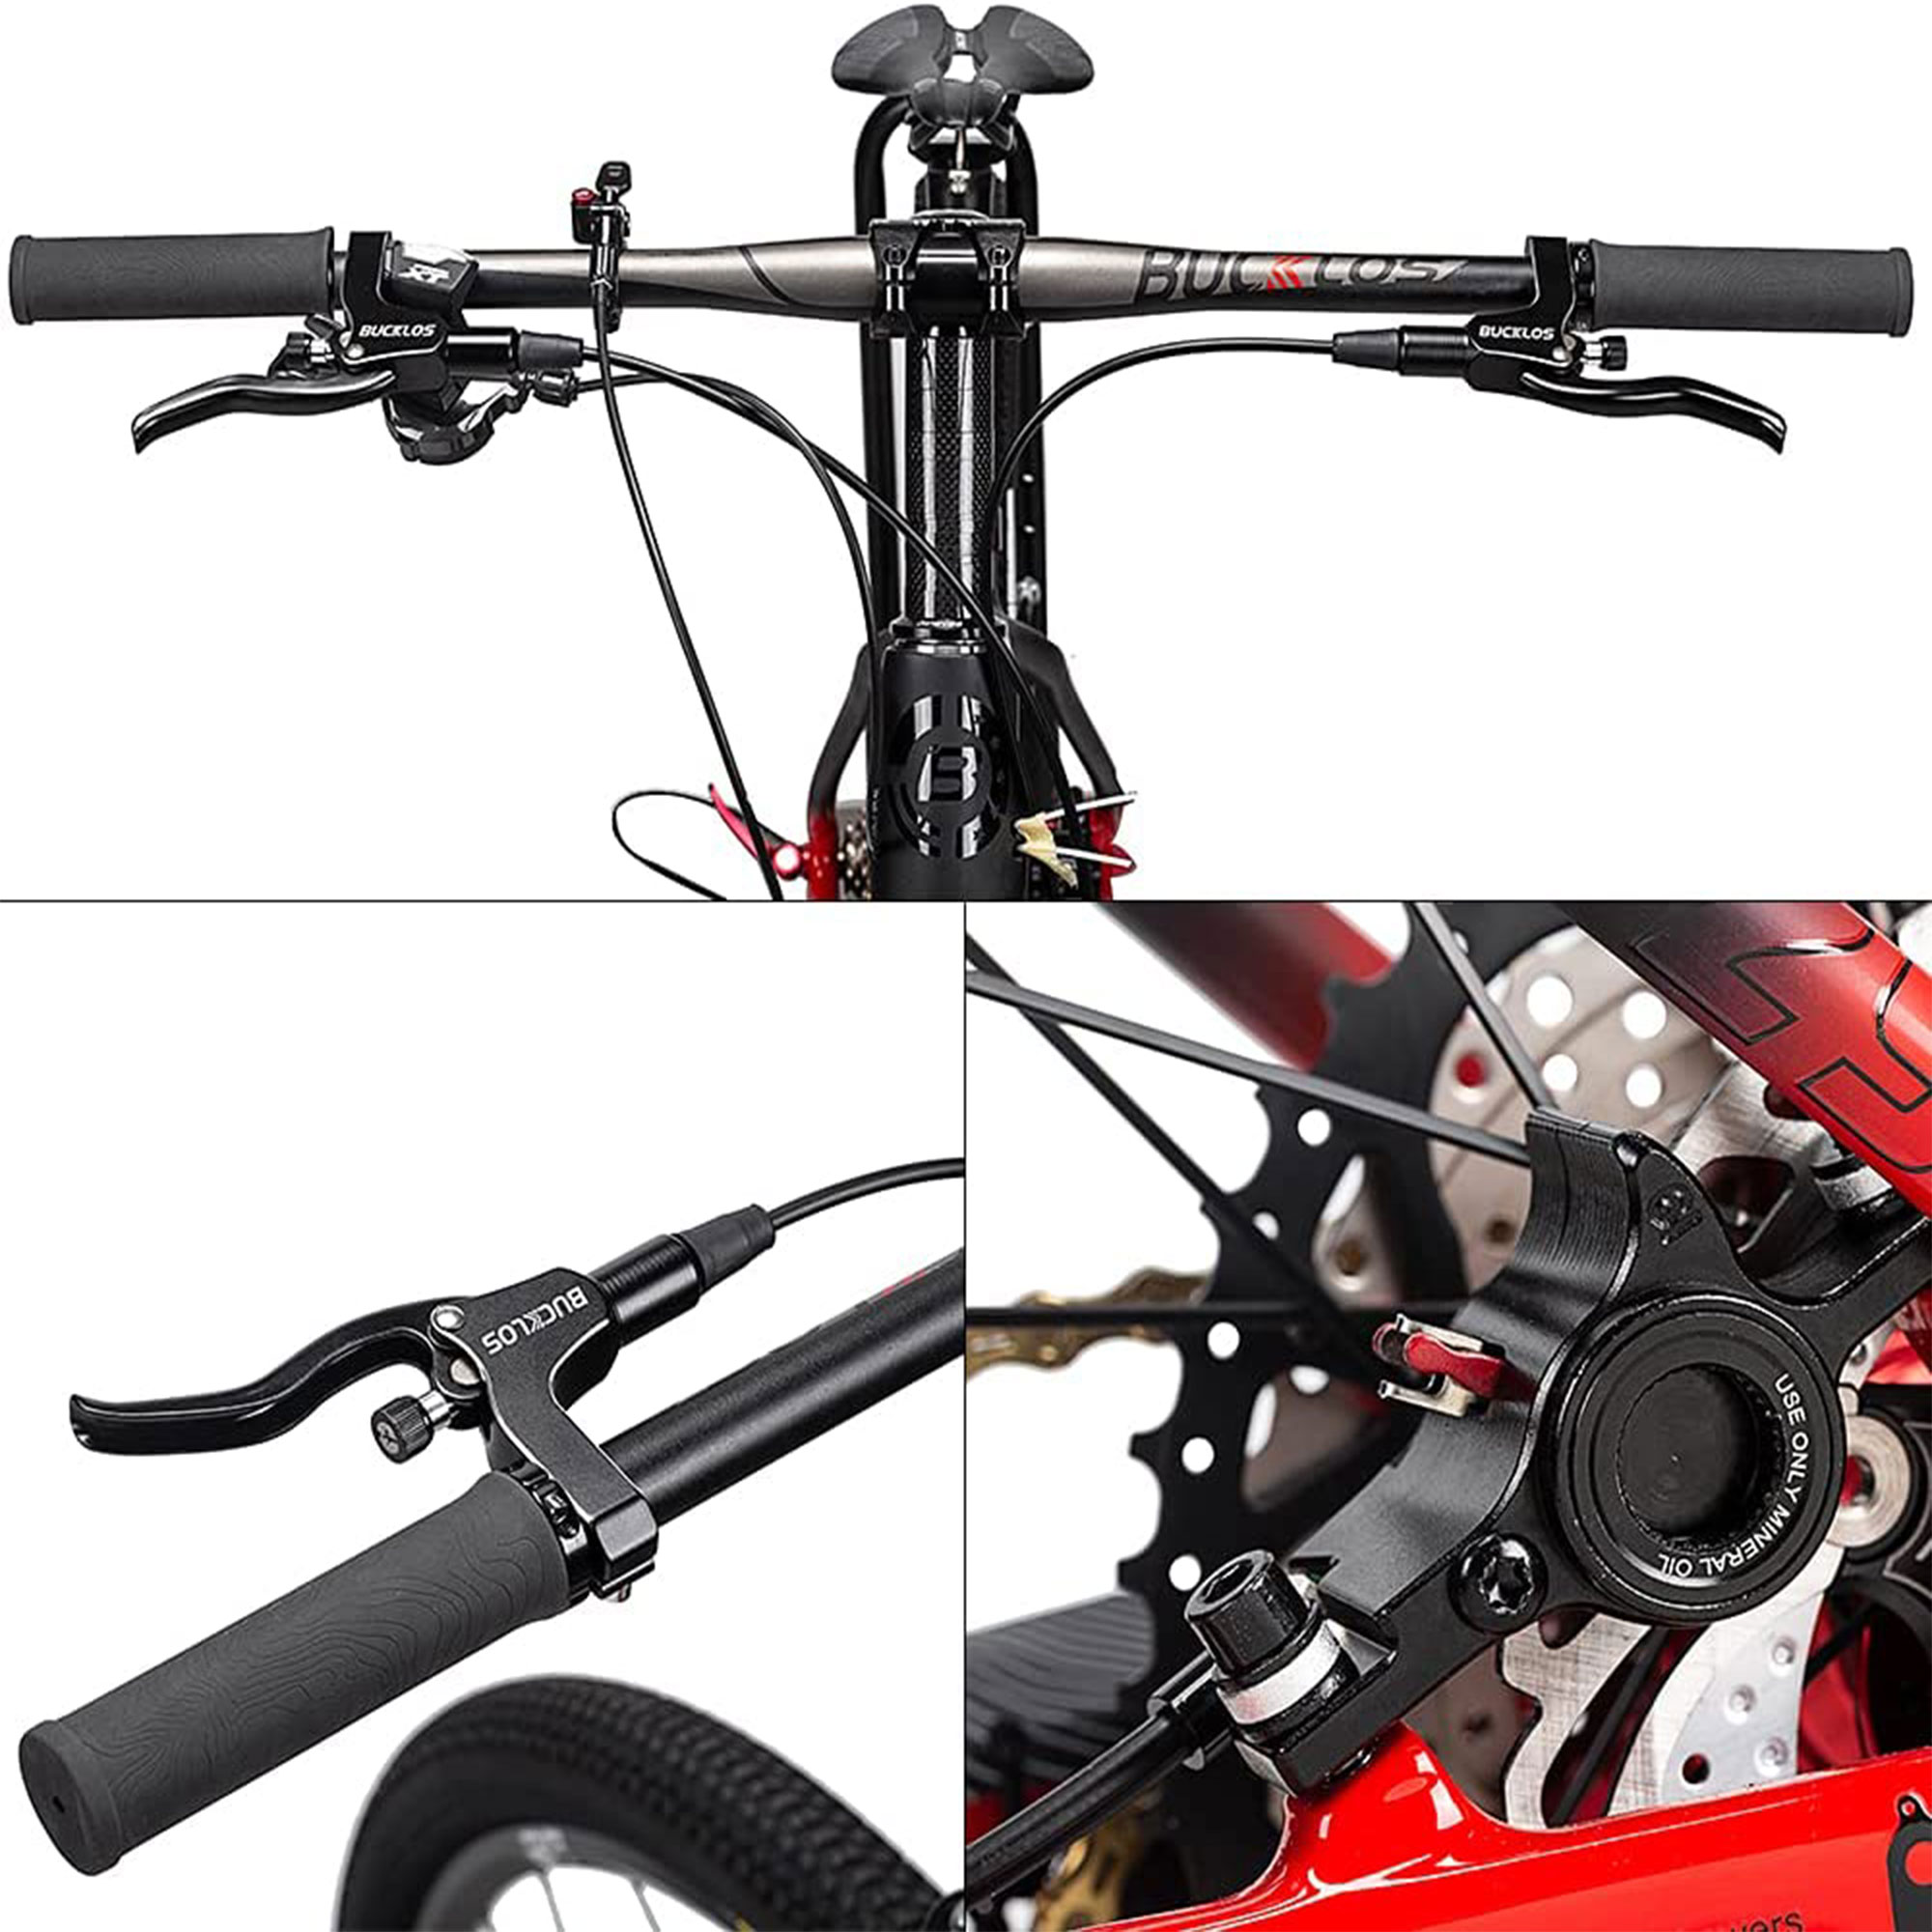 BUCKLOS MTB Hydraulic Disc Brakes set with Rotor, Mountain Bike Left Front 800mm Right Rear 1500mm Aluminum Alloy Brake Lever with Calipers fit Mounta